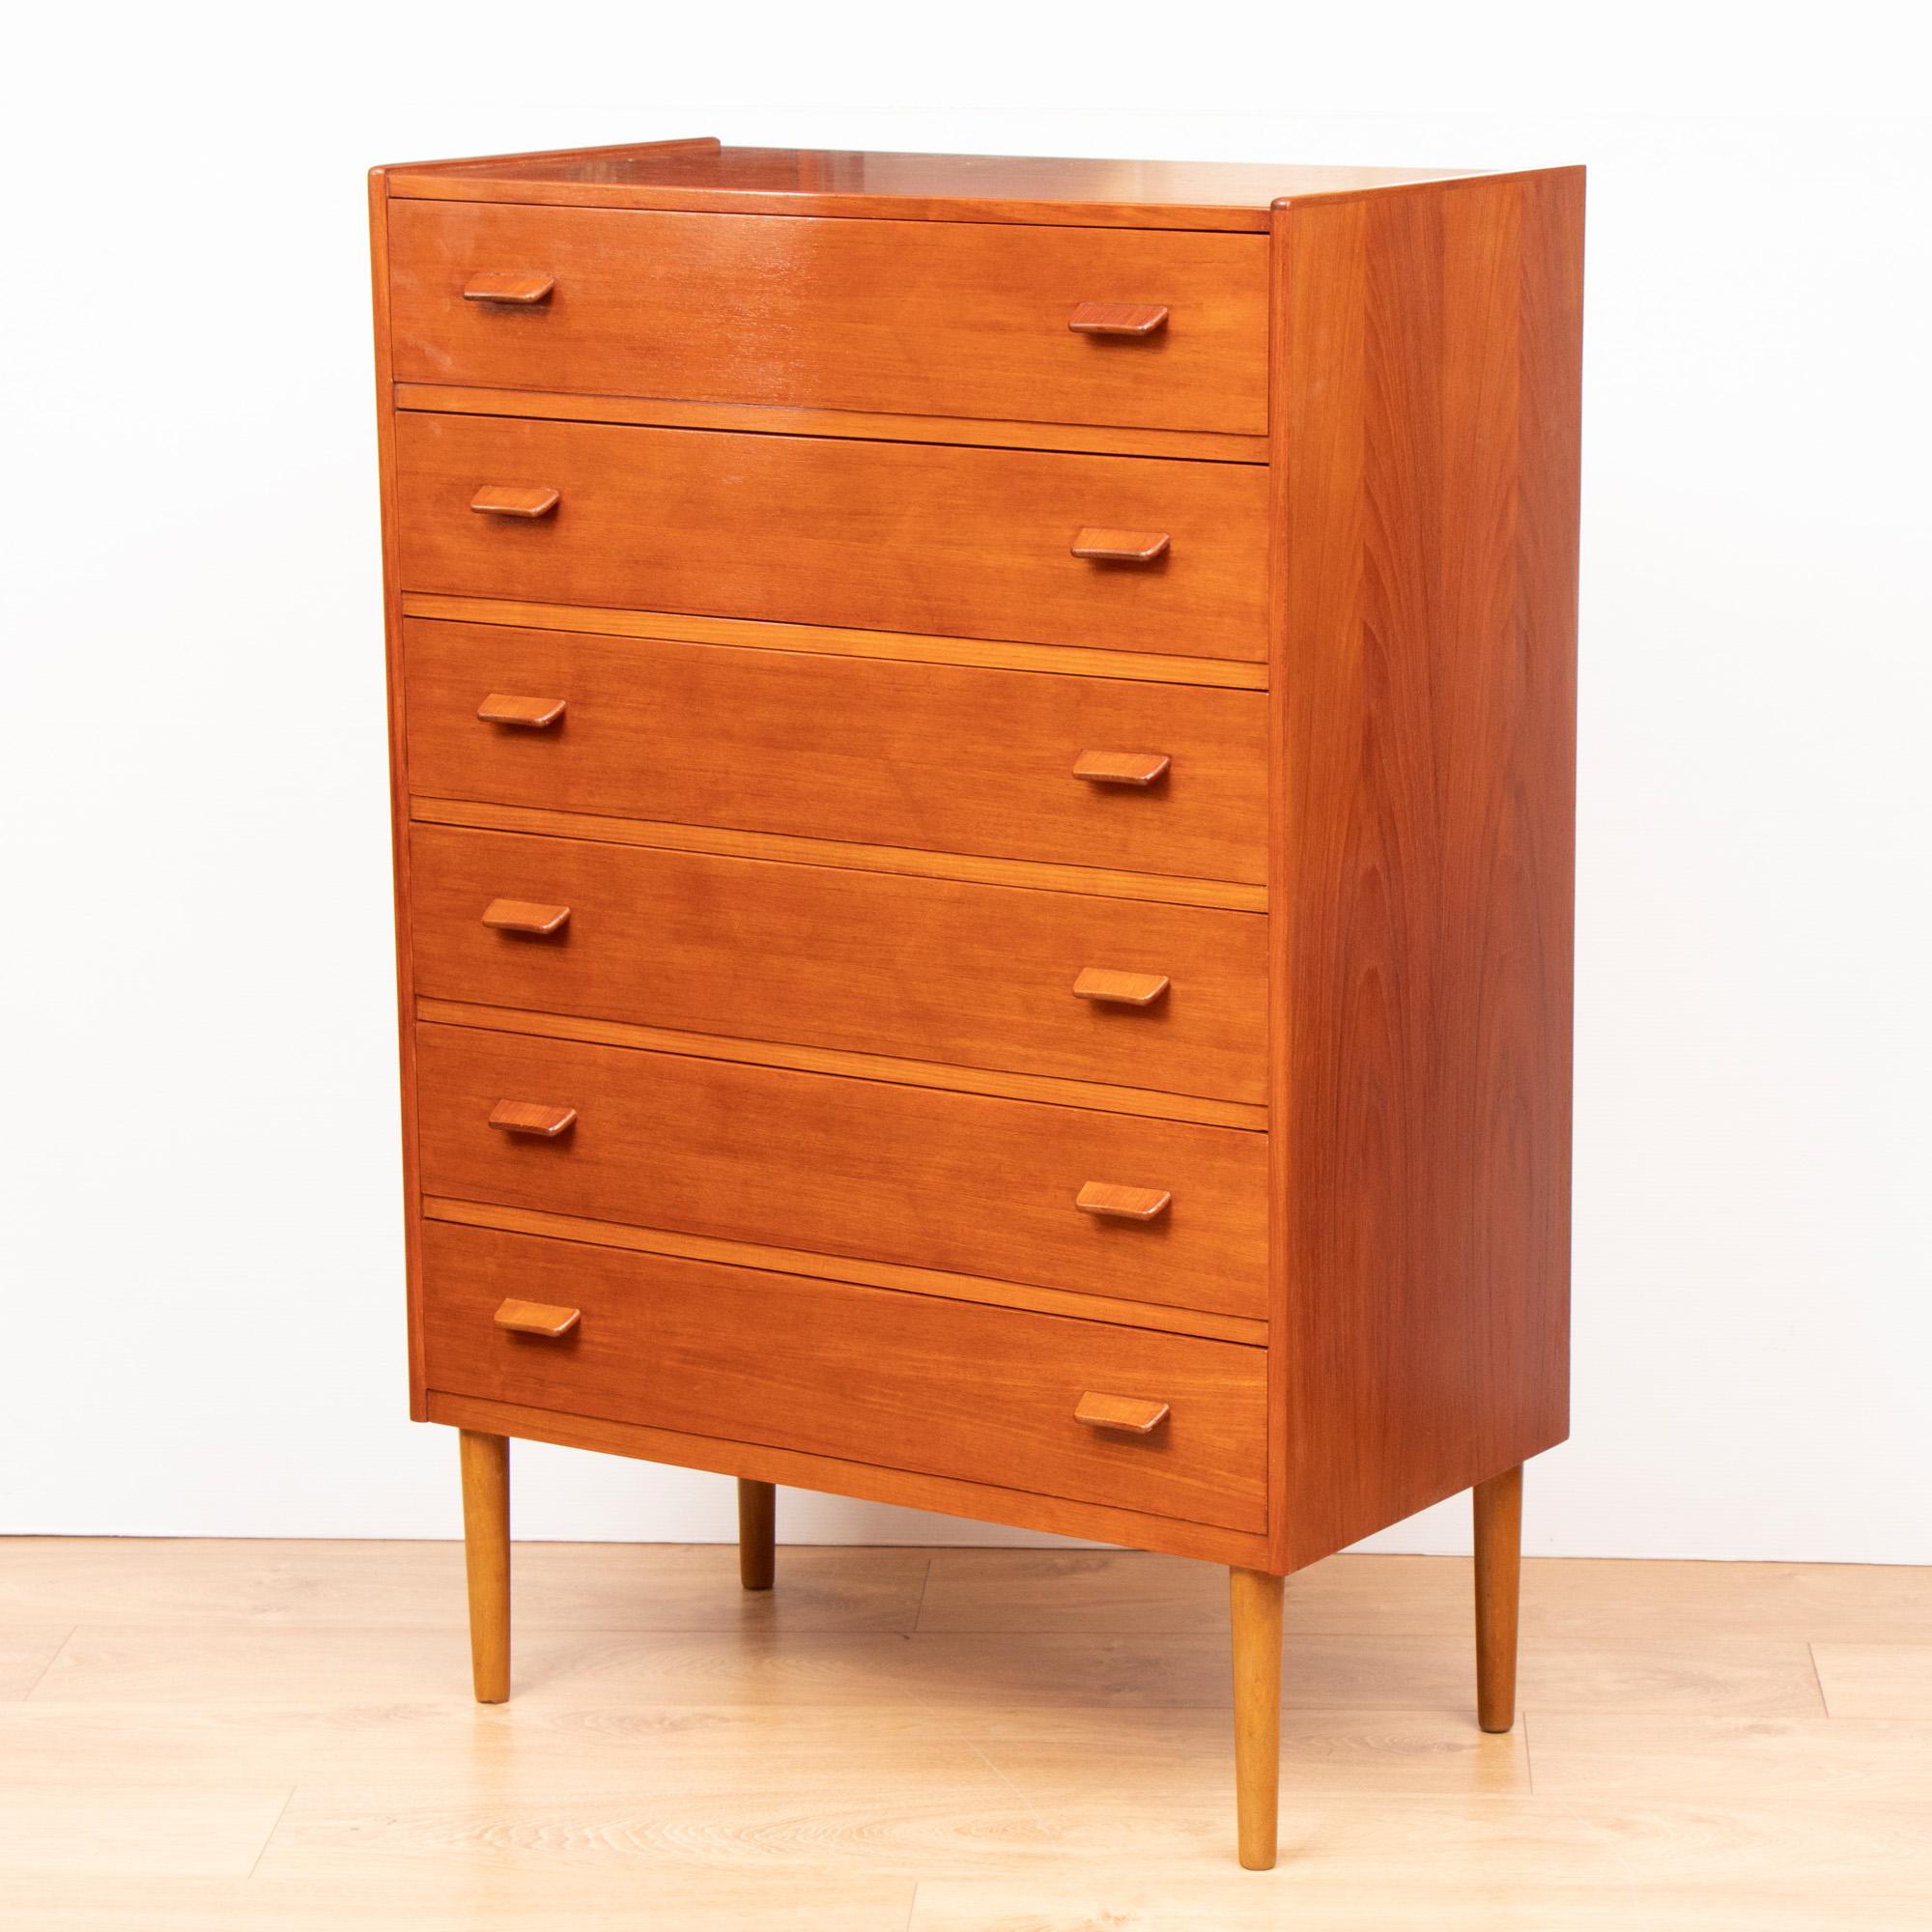 Midcentury teak chest of drawers with tab handles designed by Poul Volther for Munch Moller Slagelse and retailed by Heals of London, circa 1960.